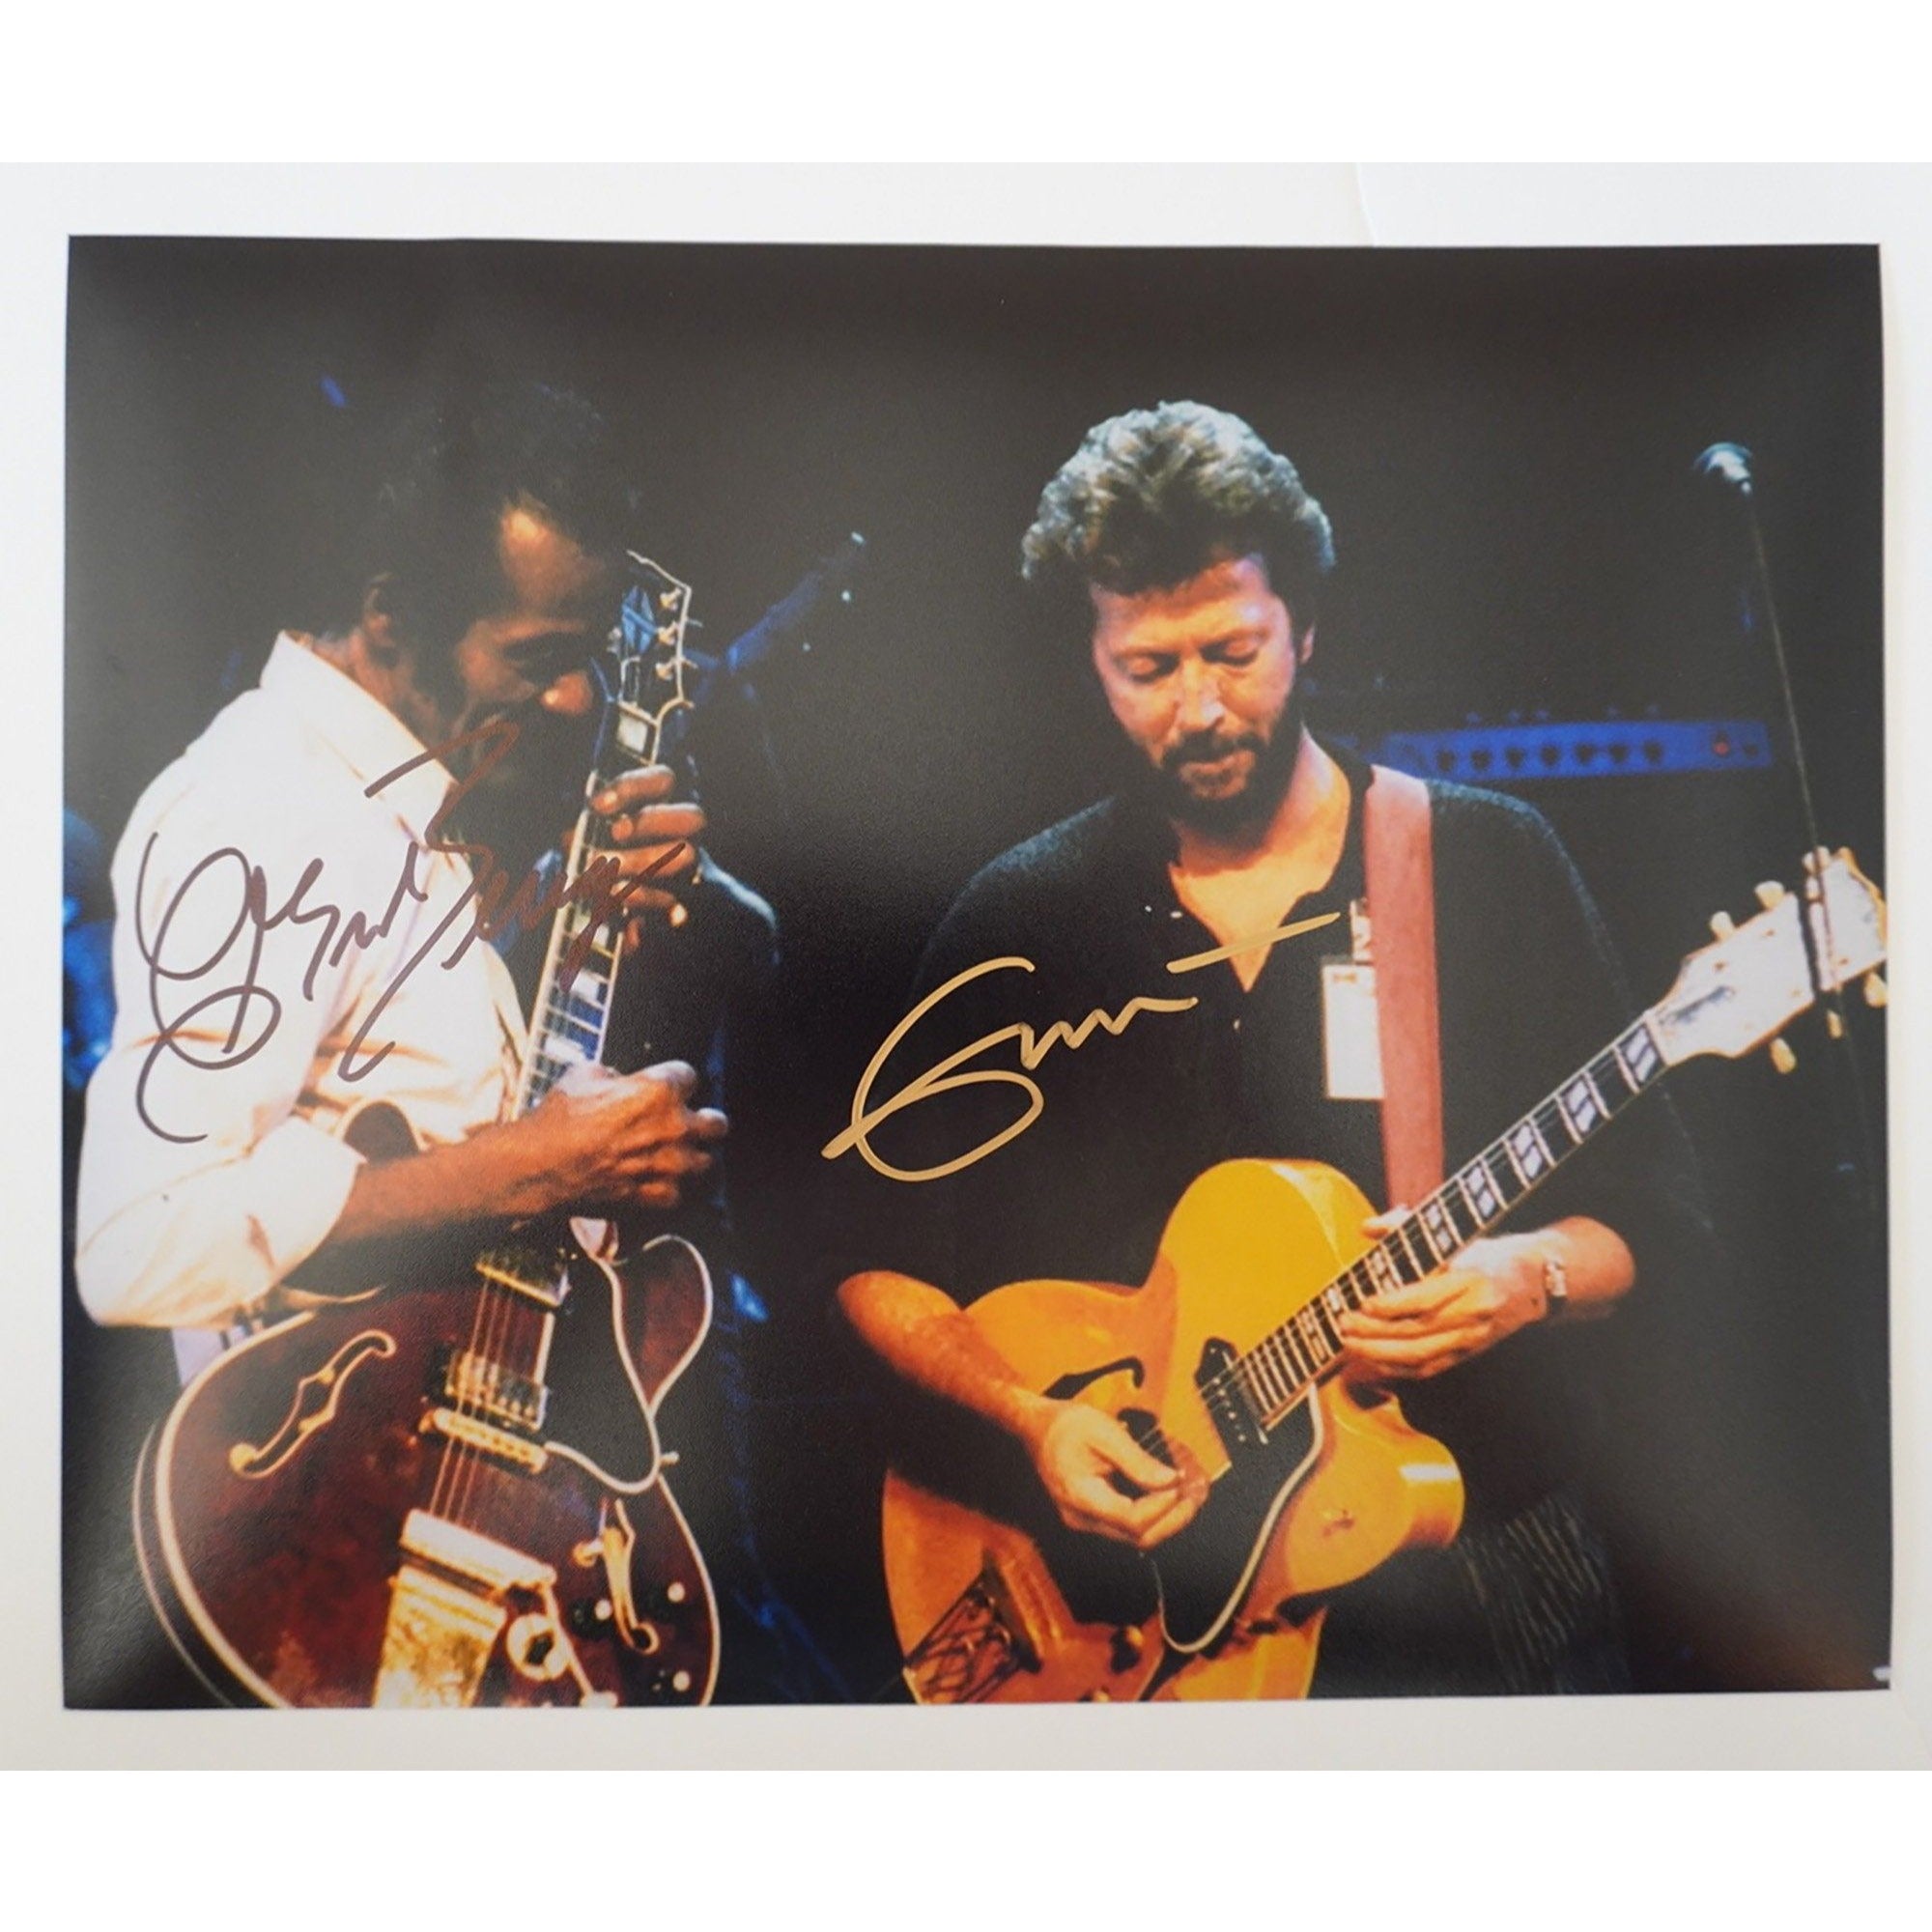 Eric Clapton and Chuck Berry 8 by 10 signed photo with proof